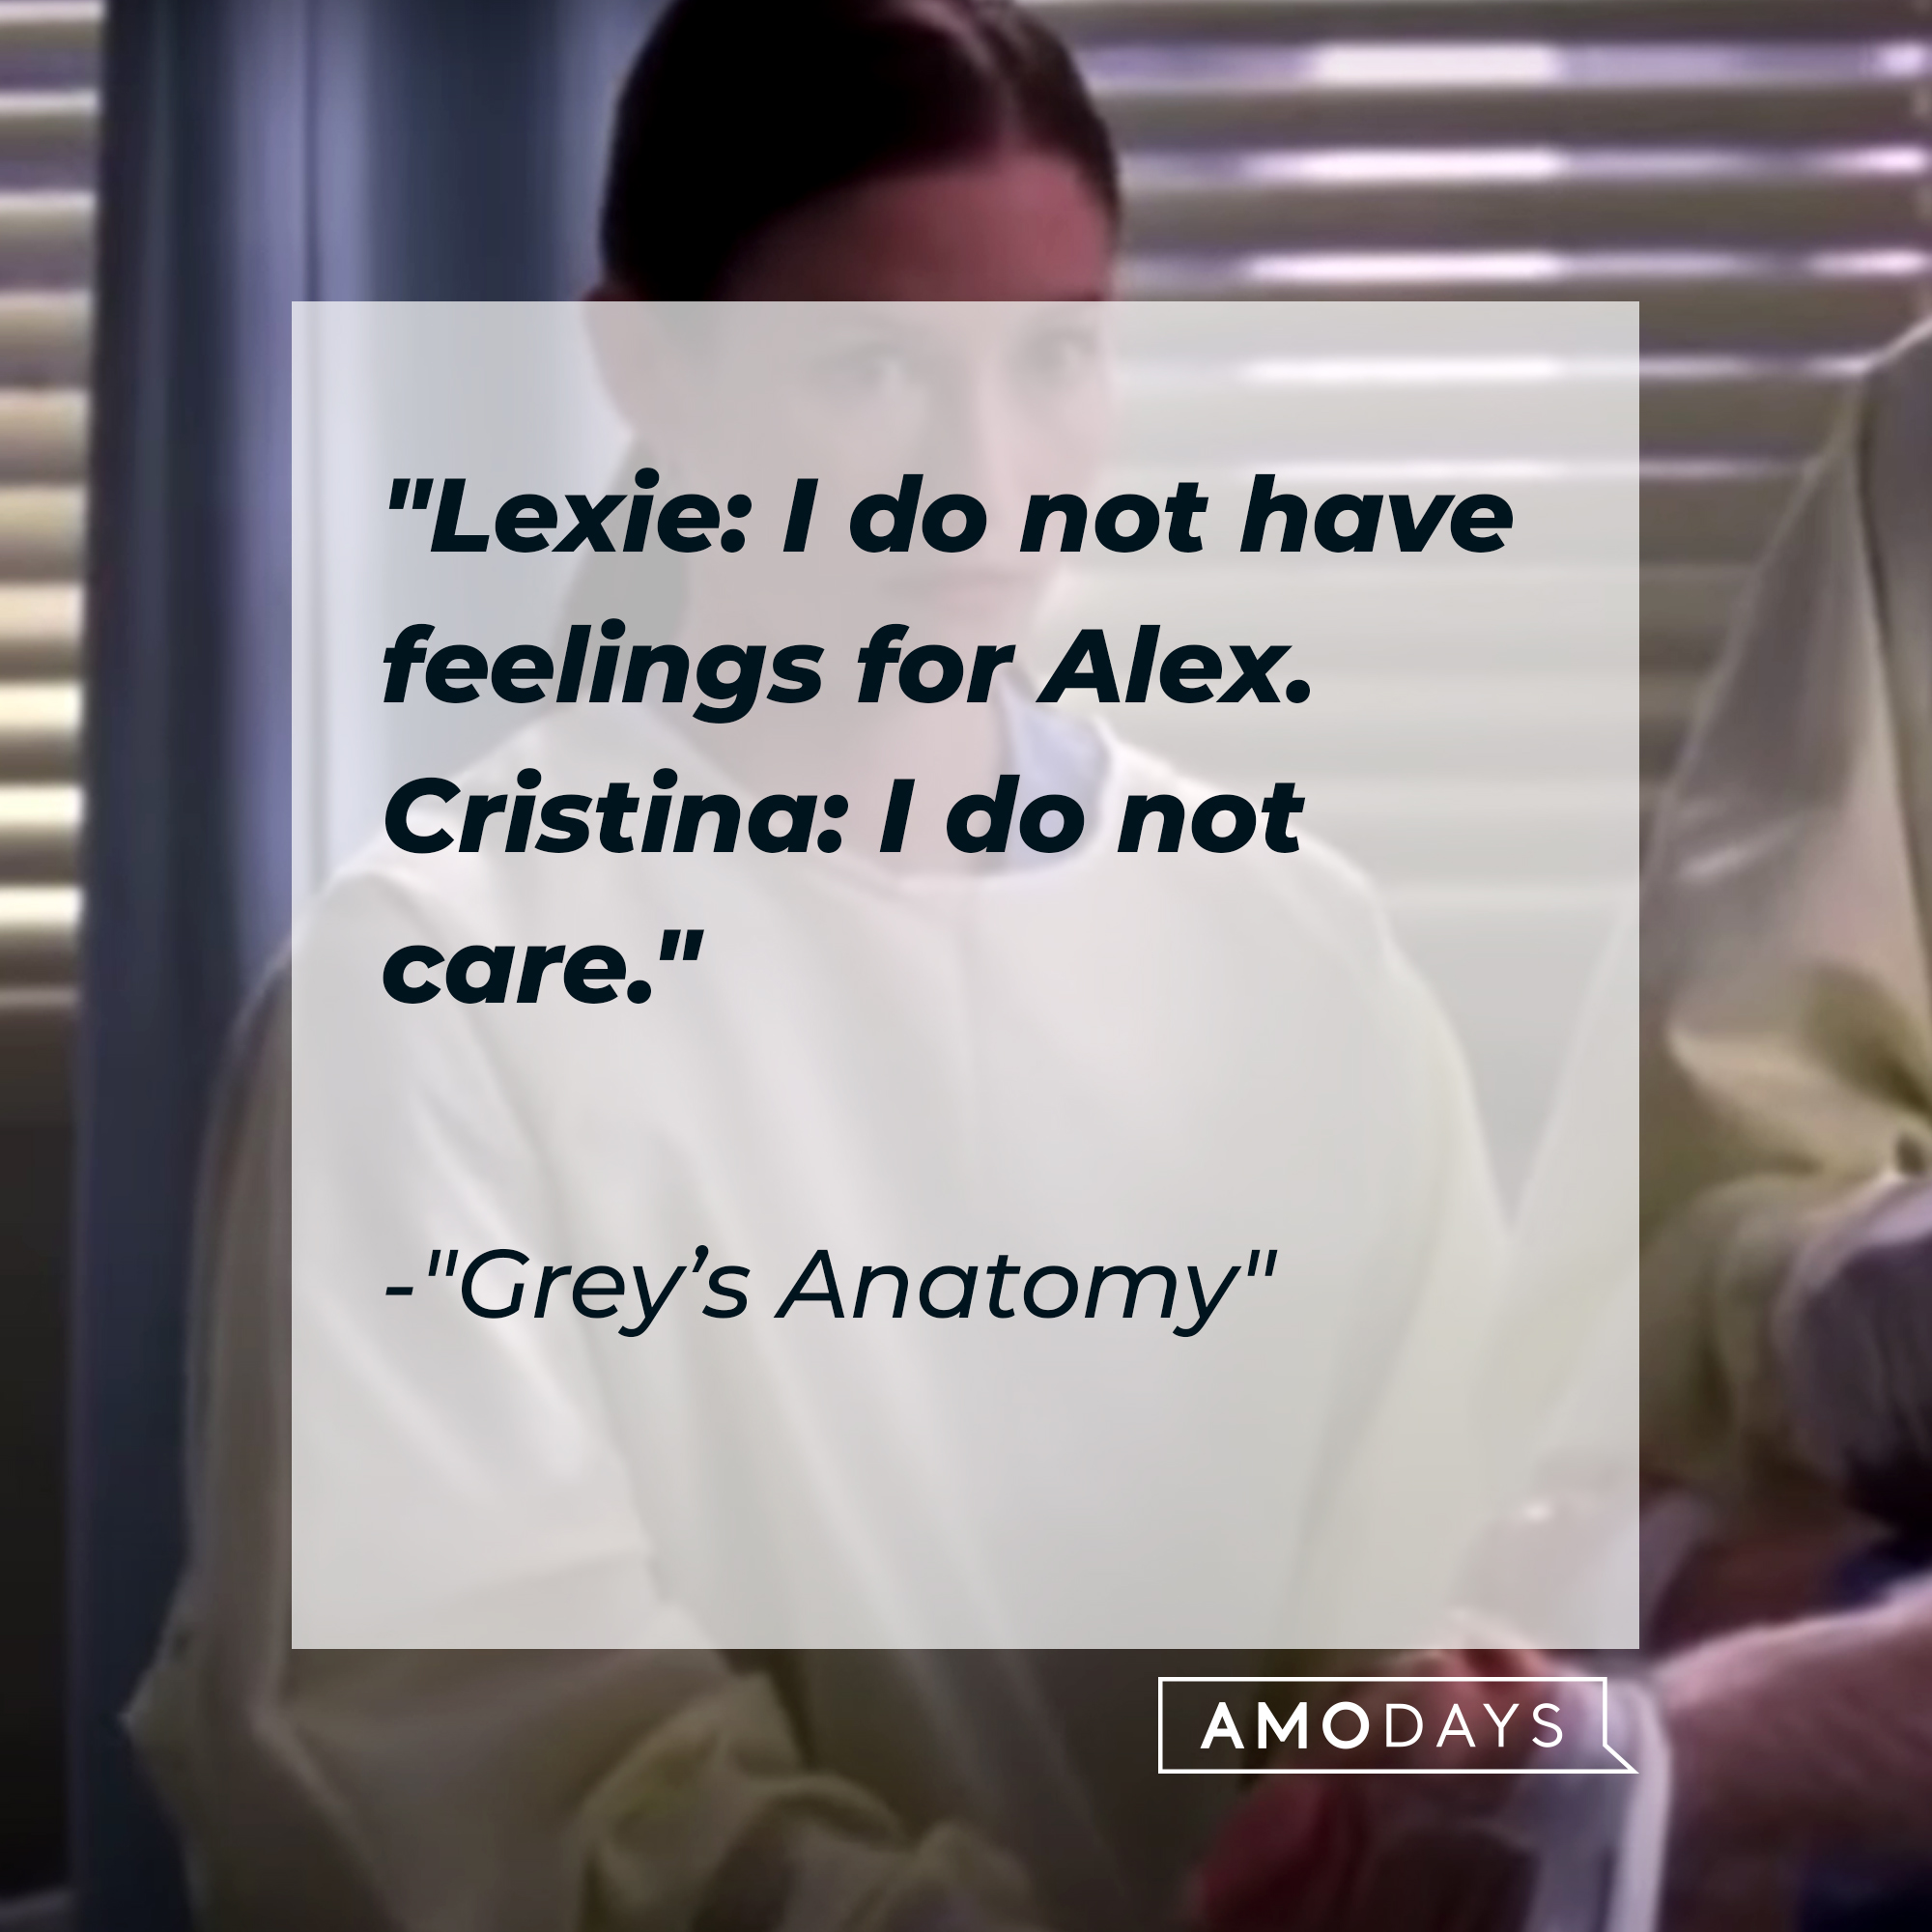 Lexie Grey with her quote: "Lexie: I do not have feelings for Alex. ; Cristina: I do not care." | Source: Facebook.com/GreysAnatomy